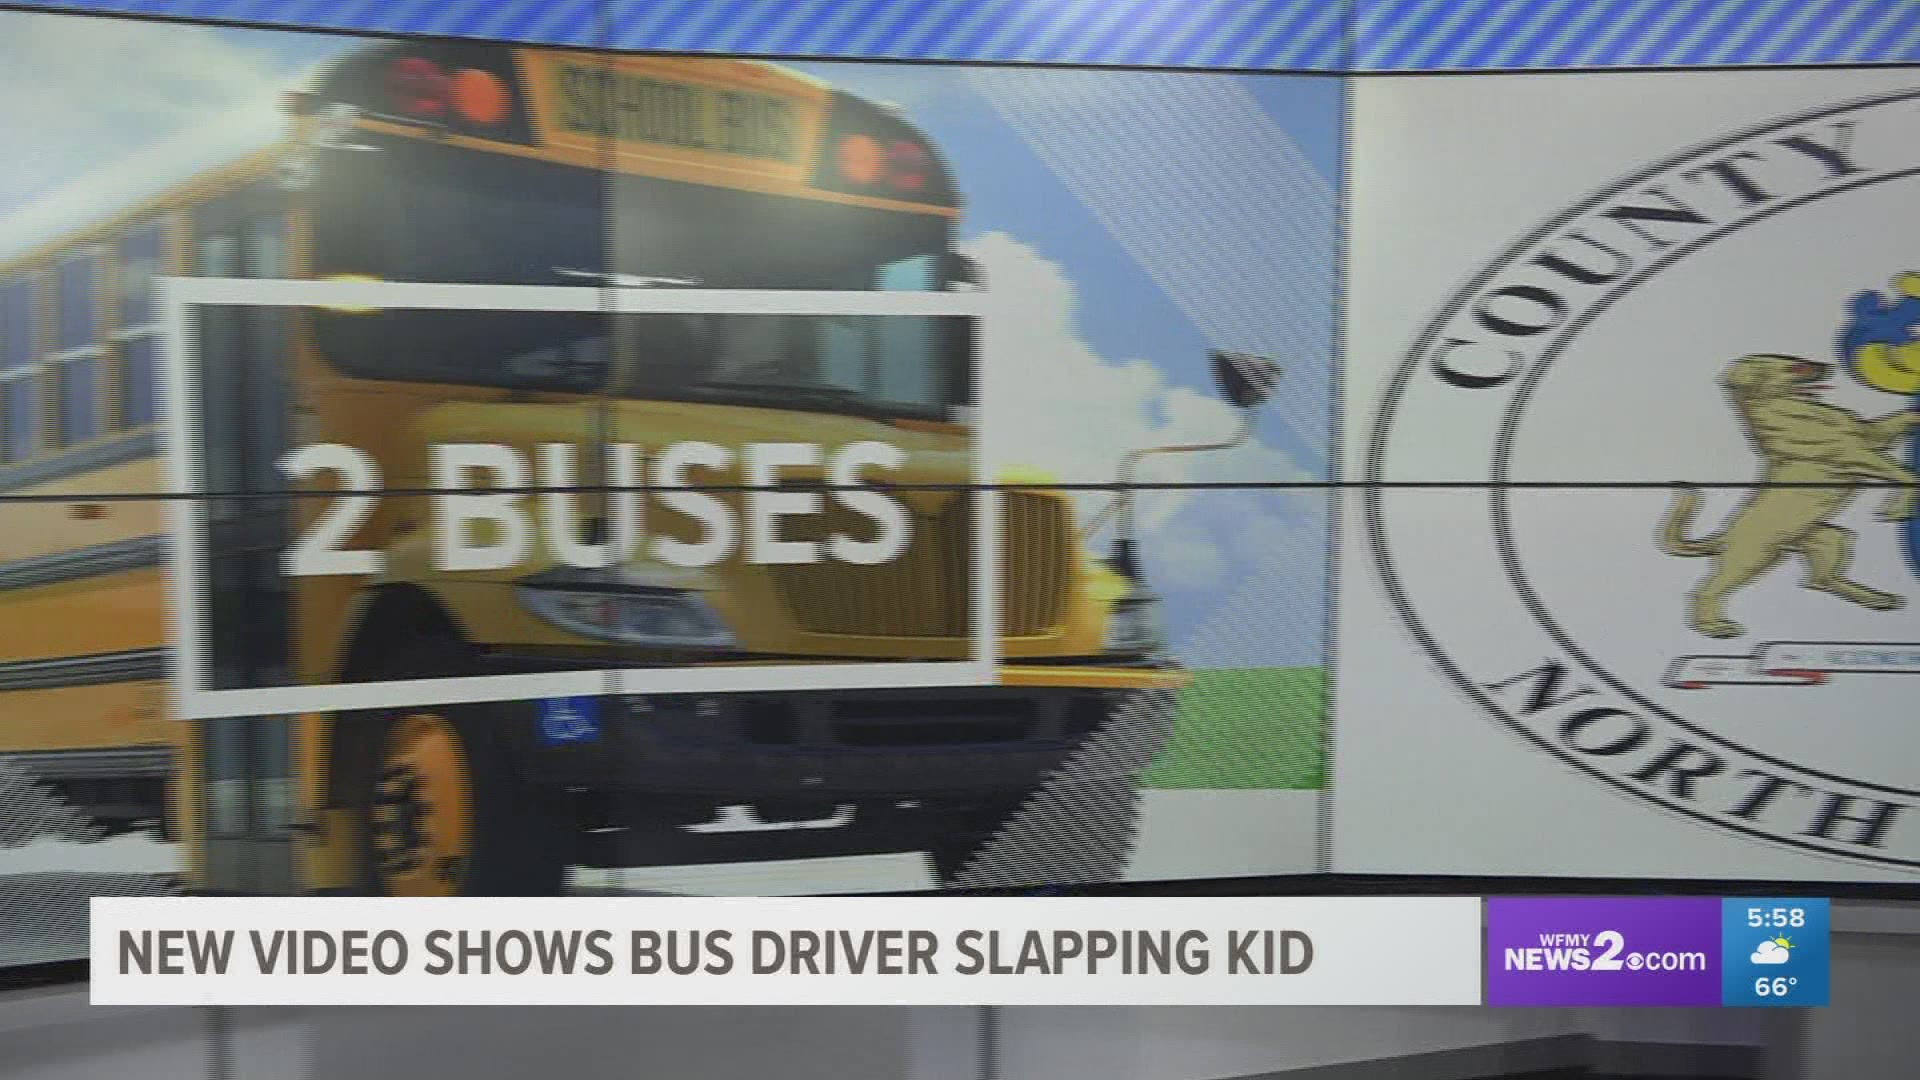 Video shows a Bus driver slapping a kid in the face .